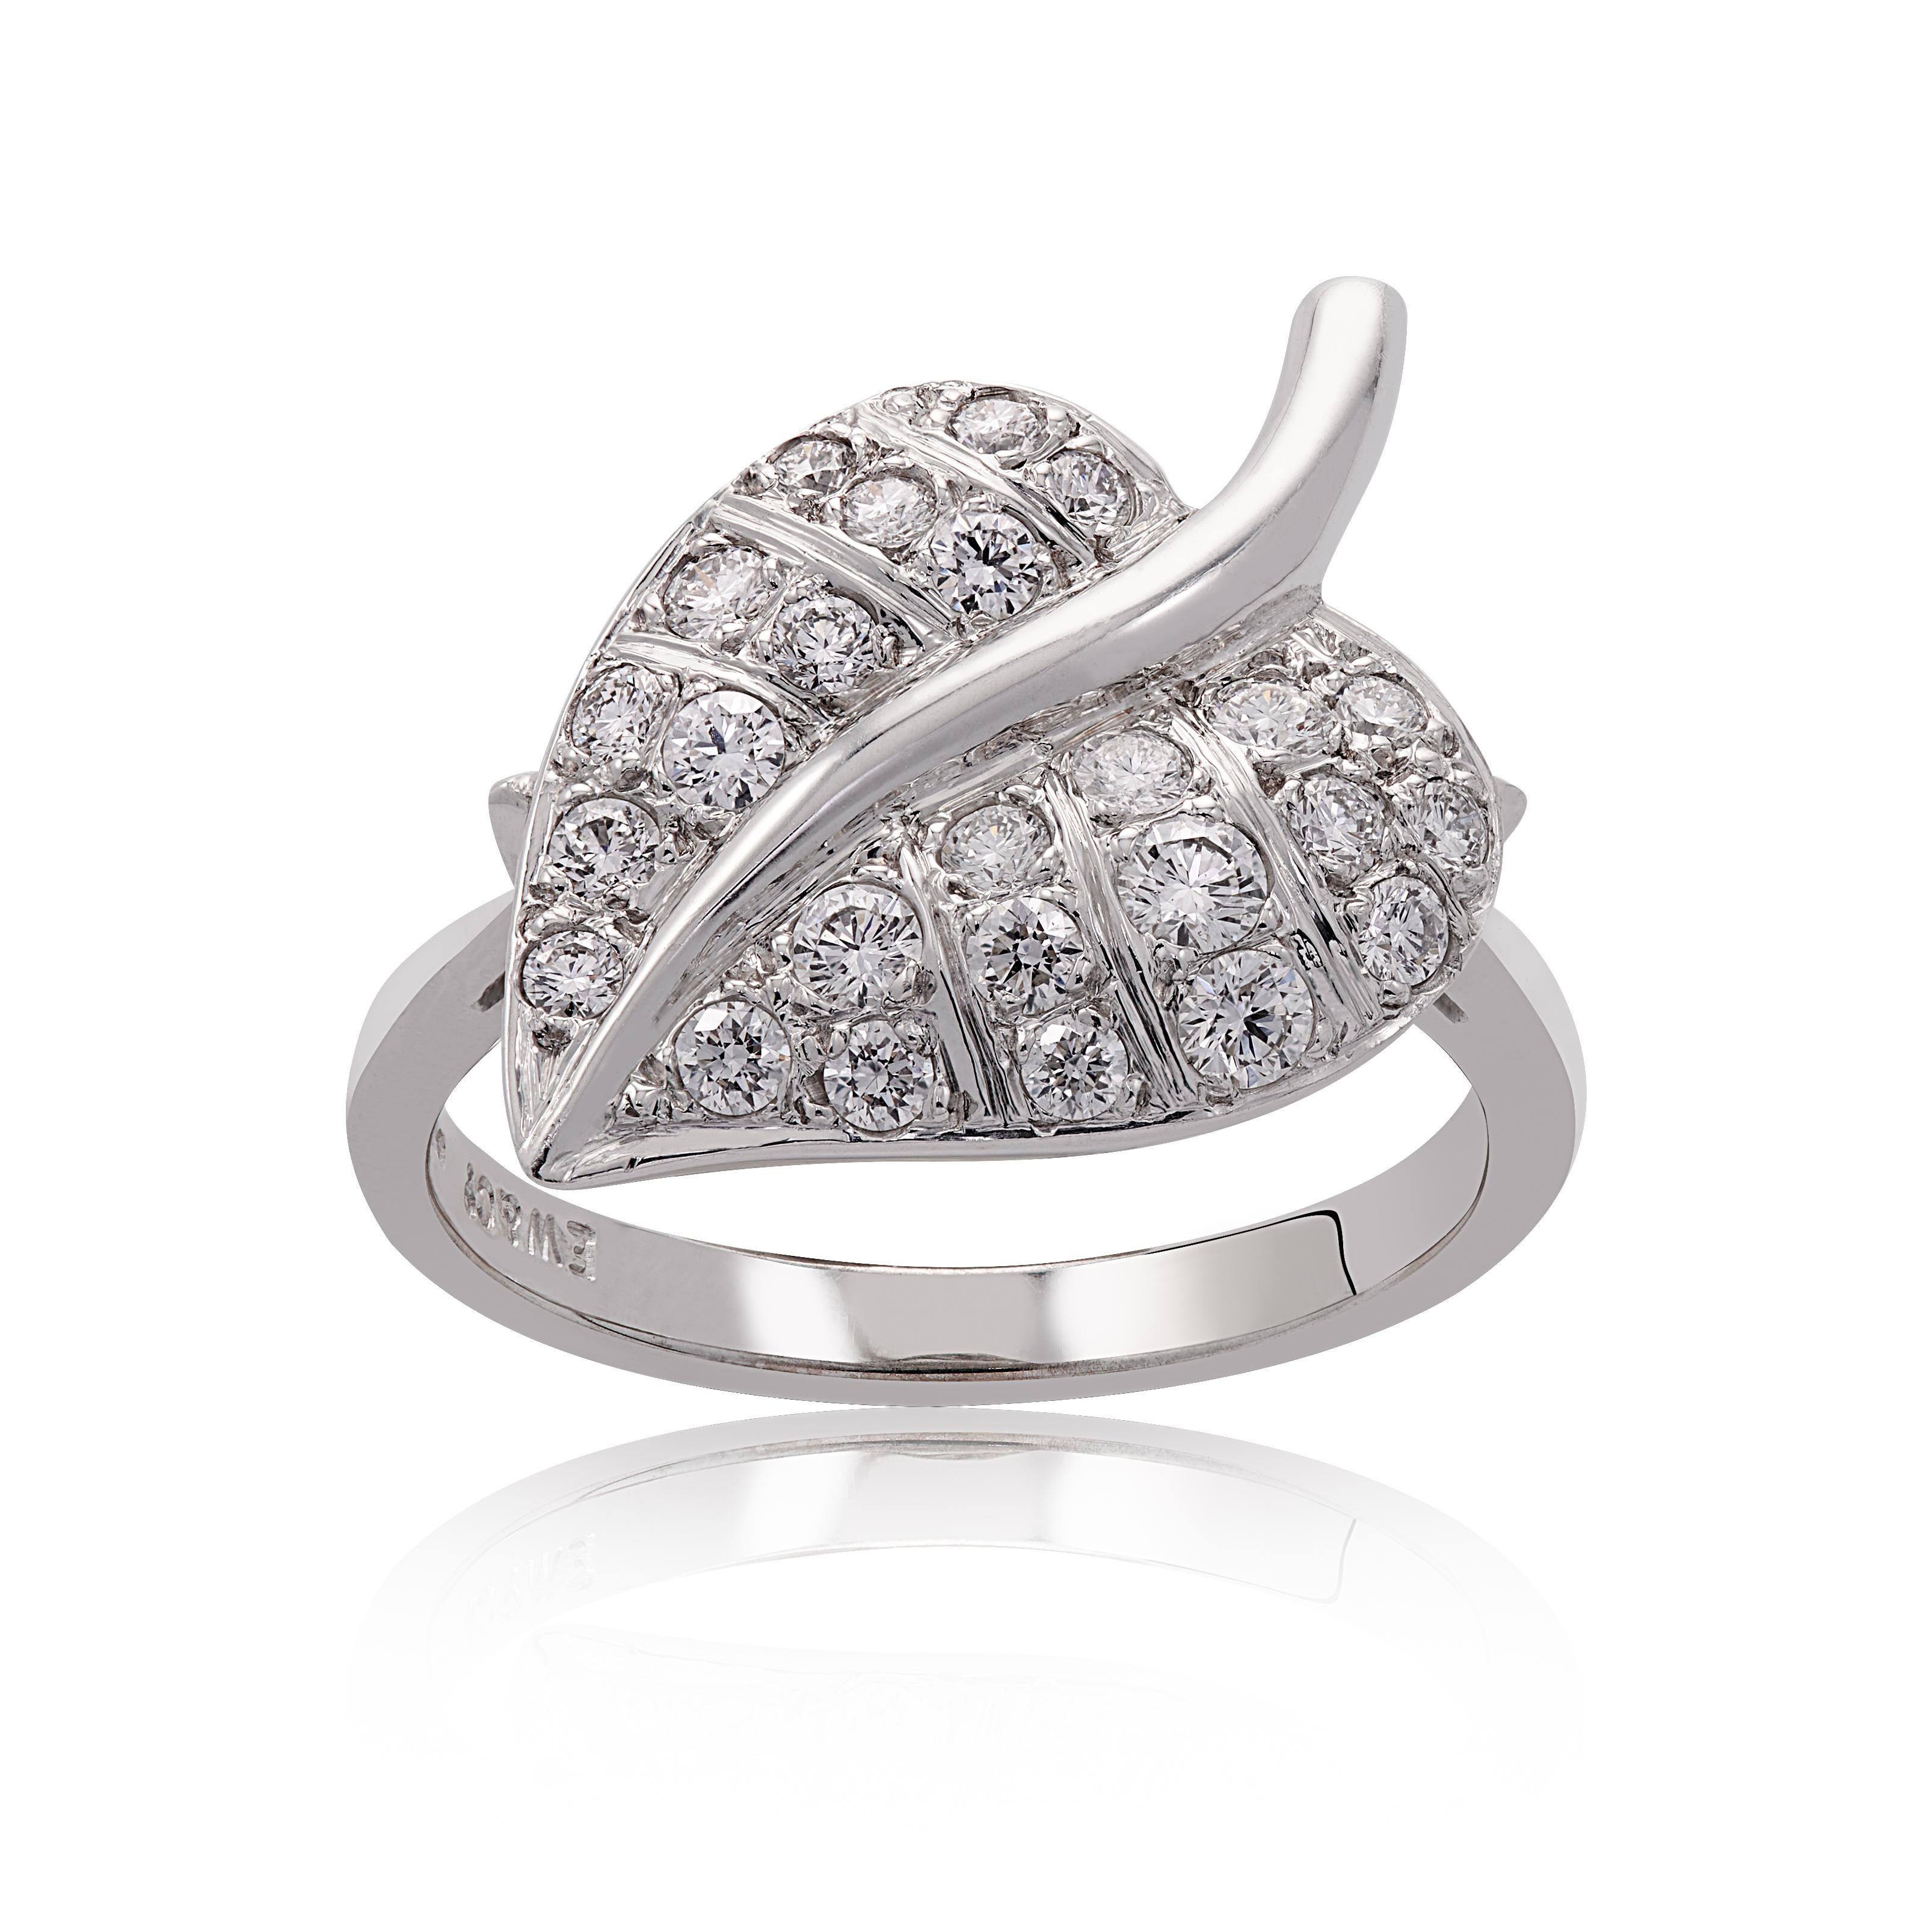 E Wolfe & Company Handmade 18ct White Gold Diamond-set Leaf Ring. This handmade leaf ring has had delicate veins and lots of realistic detail carved into it and is set with .55 carats of round brilliant-cut, G colour and VS clarity diamonds. The